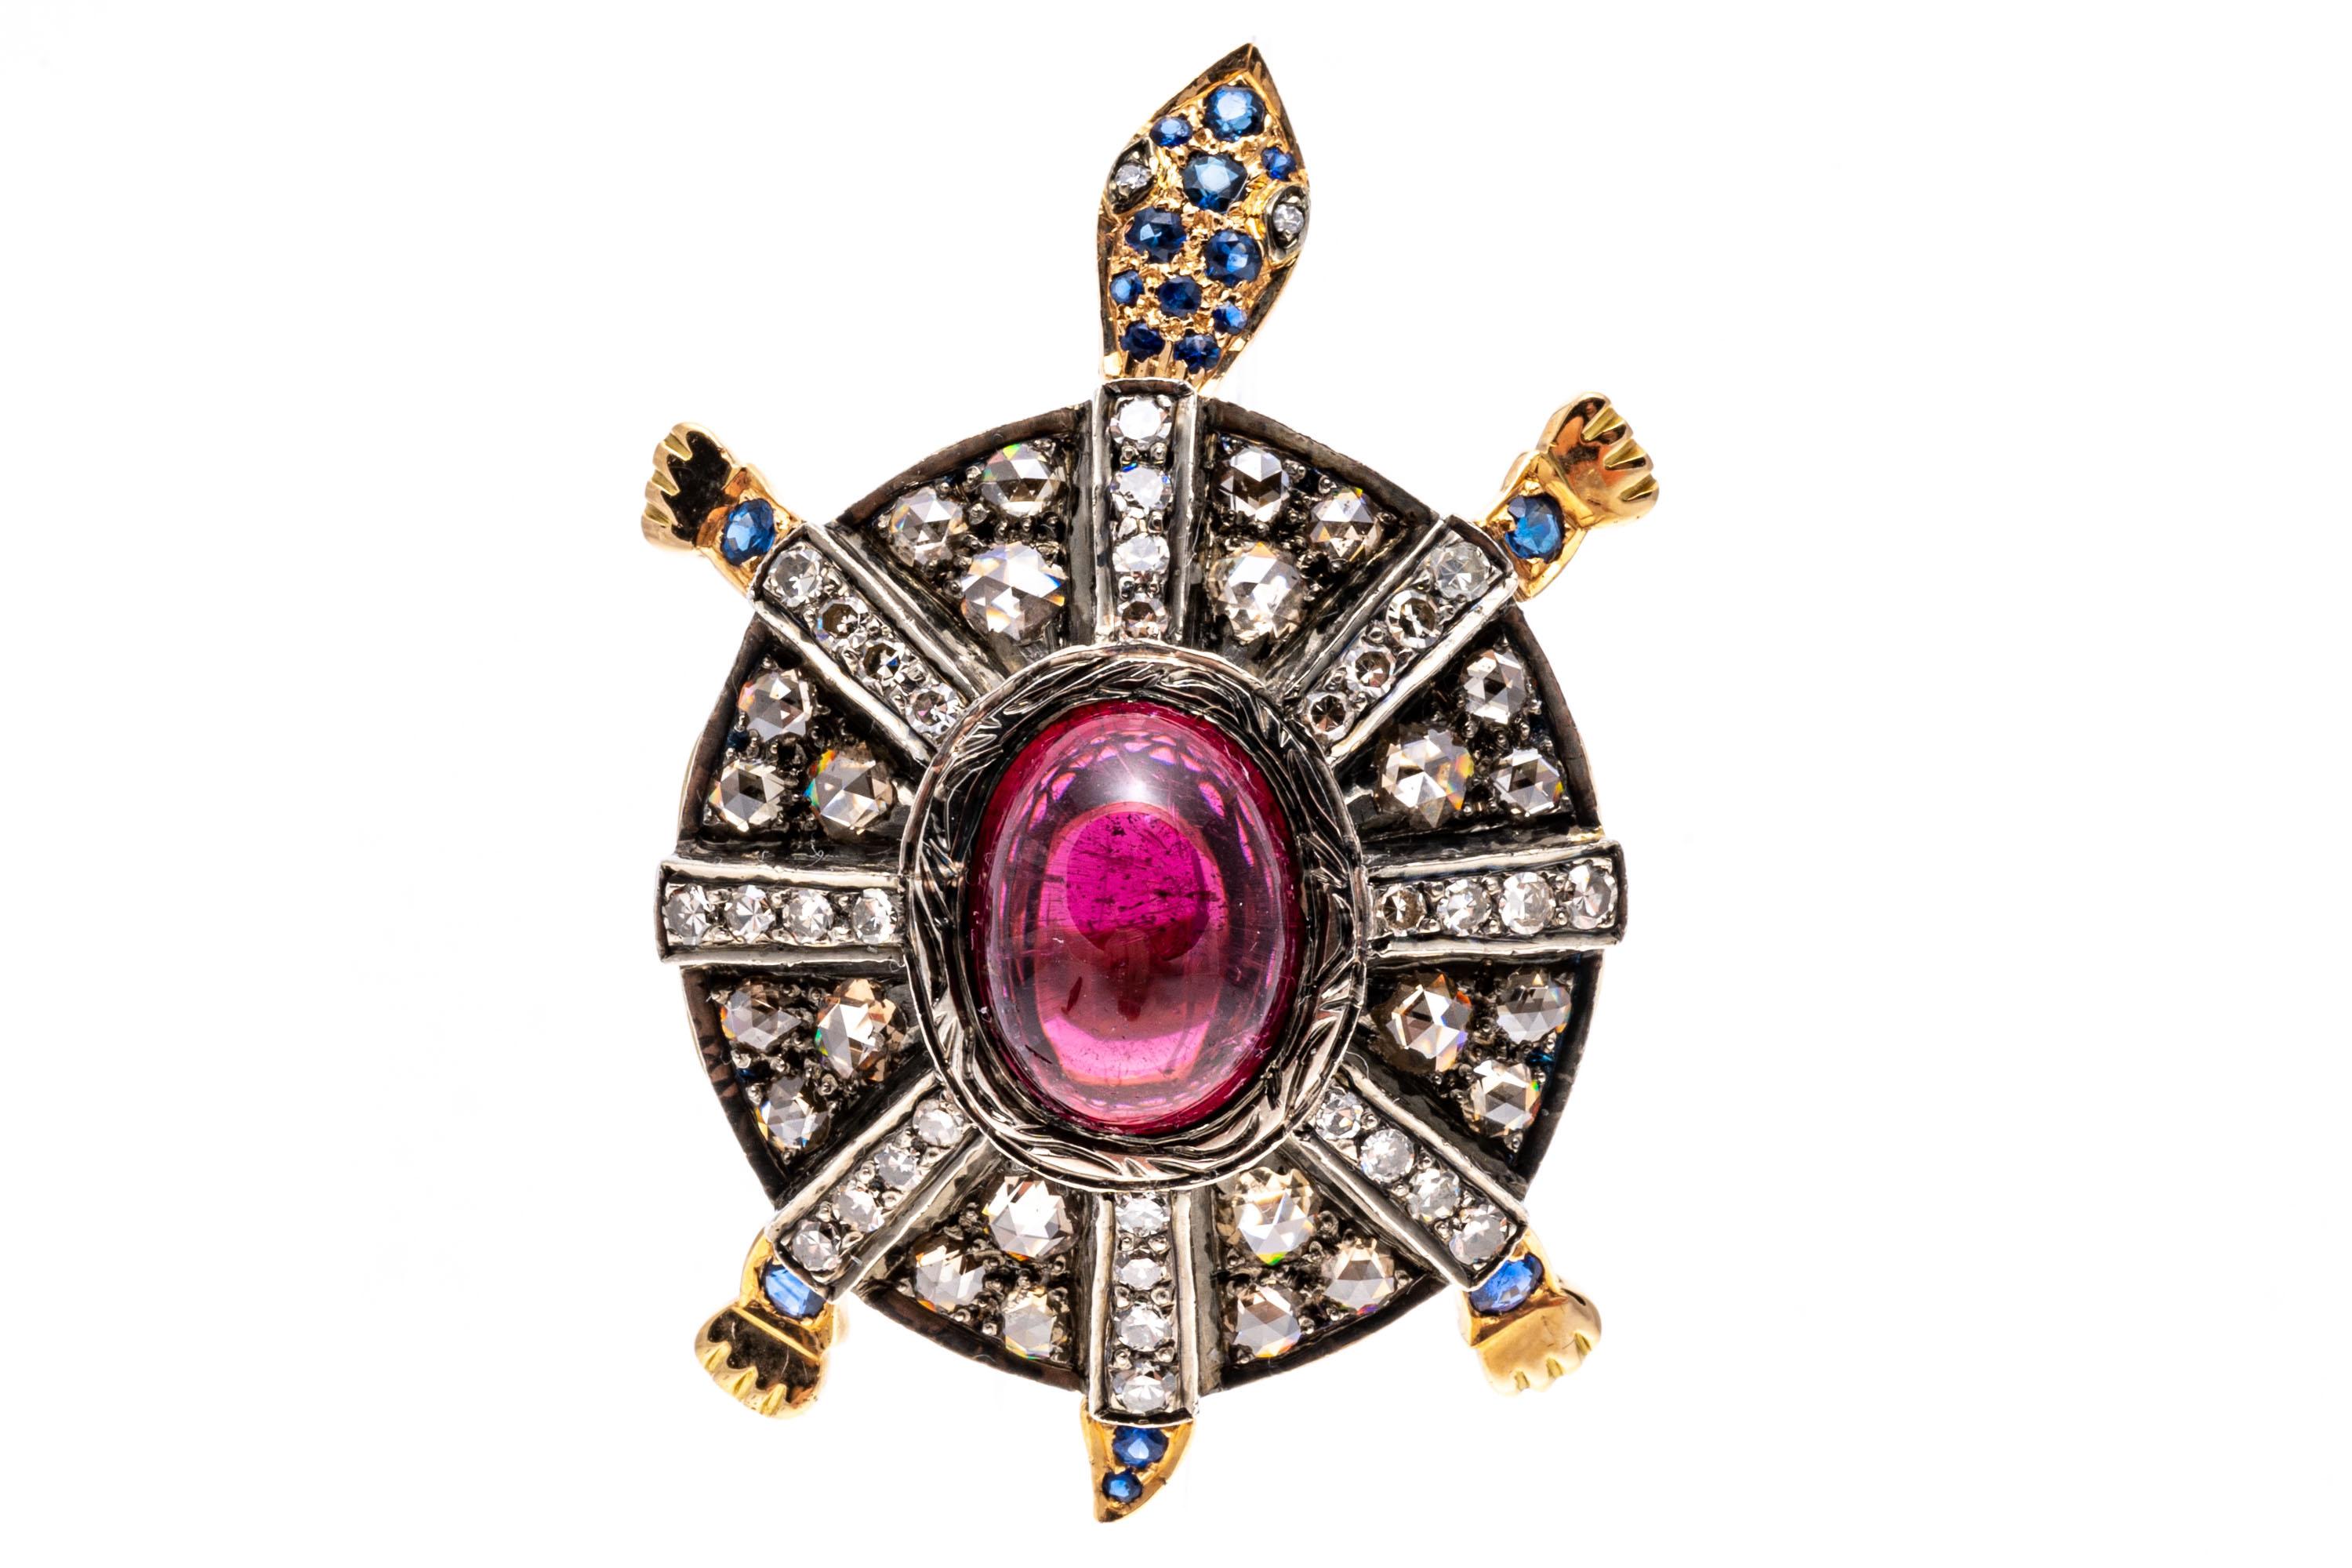 18k yellow gold ring. This stunning ring is a figural turtle ring, decorated on the back with a large, center oval cabachon, medium to dark pinkish red color tourmaline, approximately 4.01 CTS, bezel set and flanked by radiating rays of round